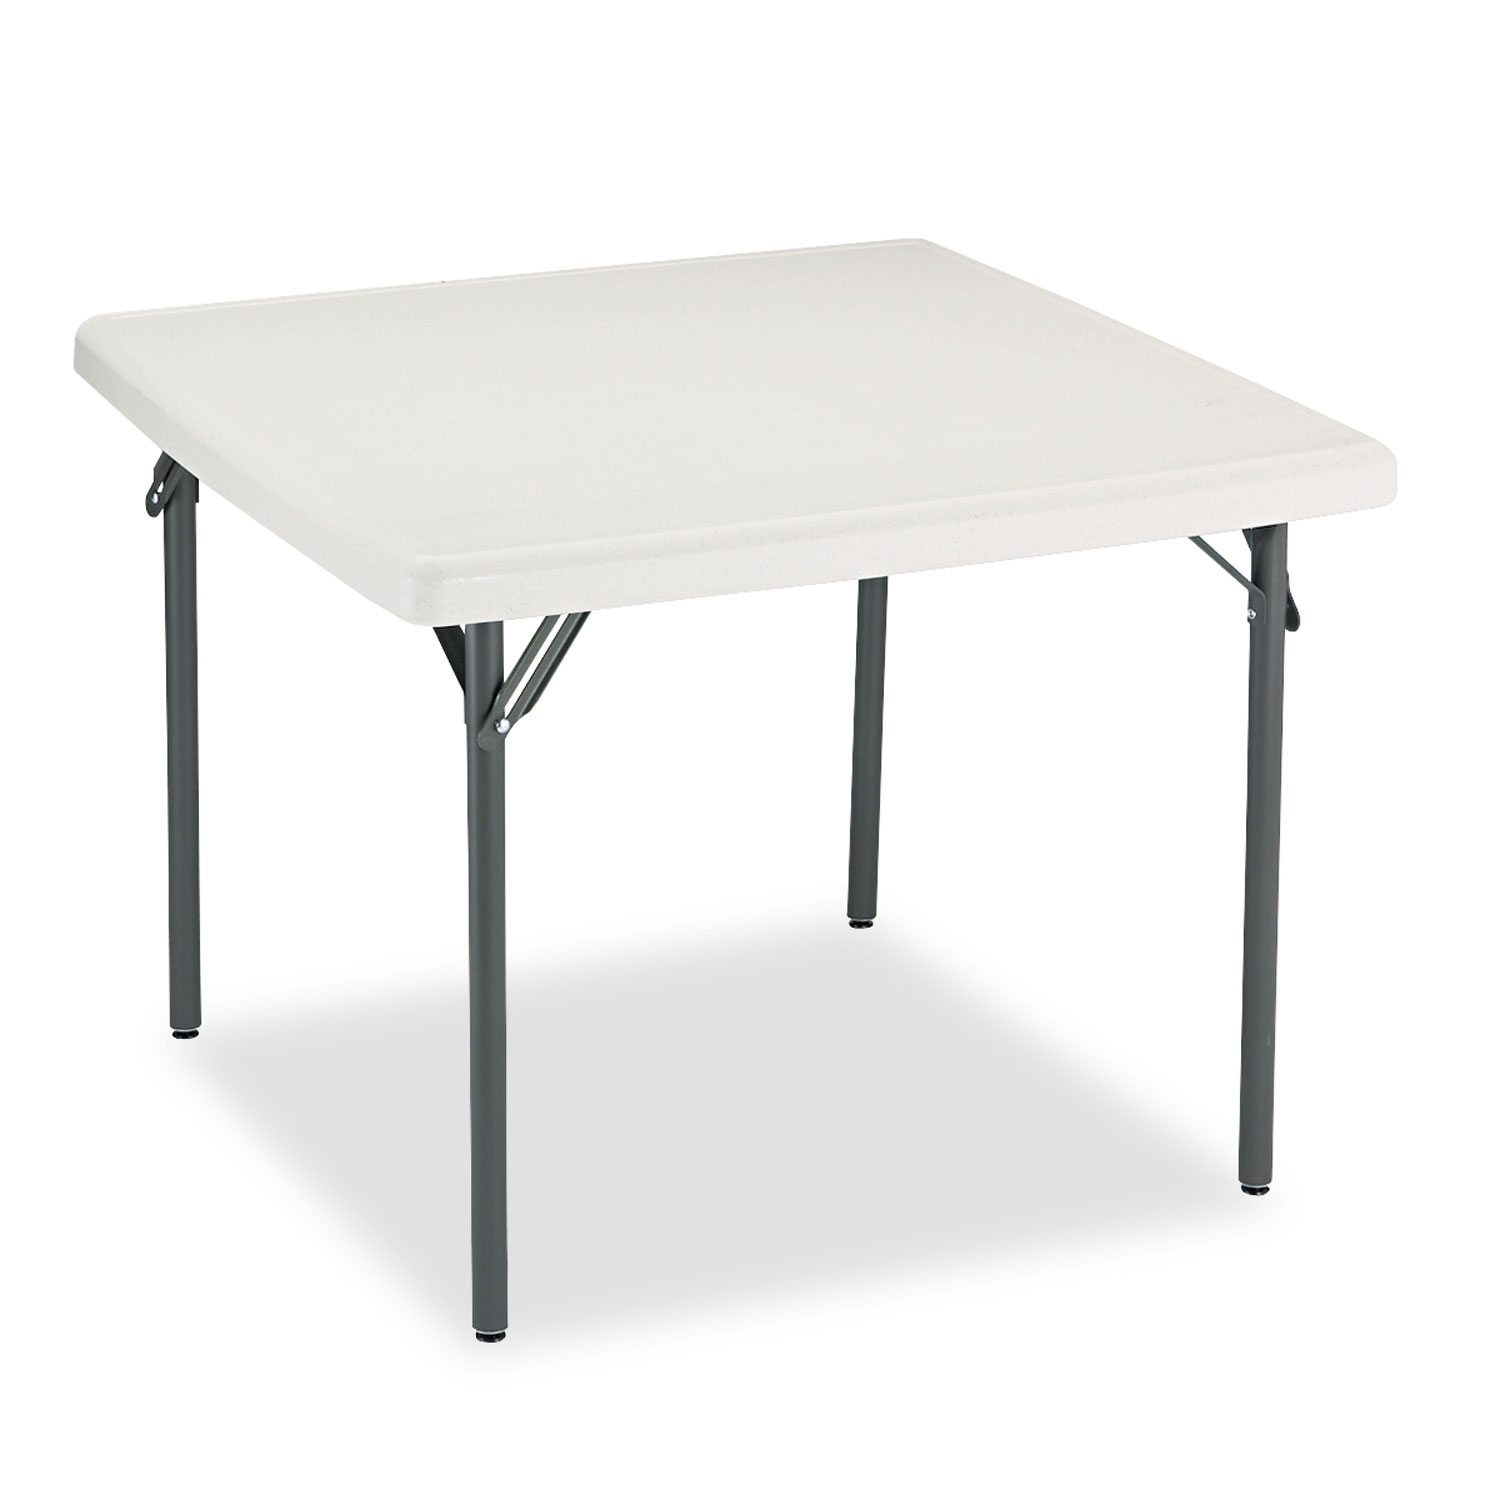 IndestrucTables Too 1200 Series Resin Folding Table, 37w x 37d x 29h, Platinum